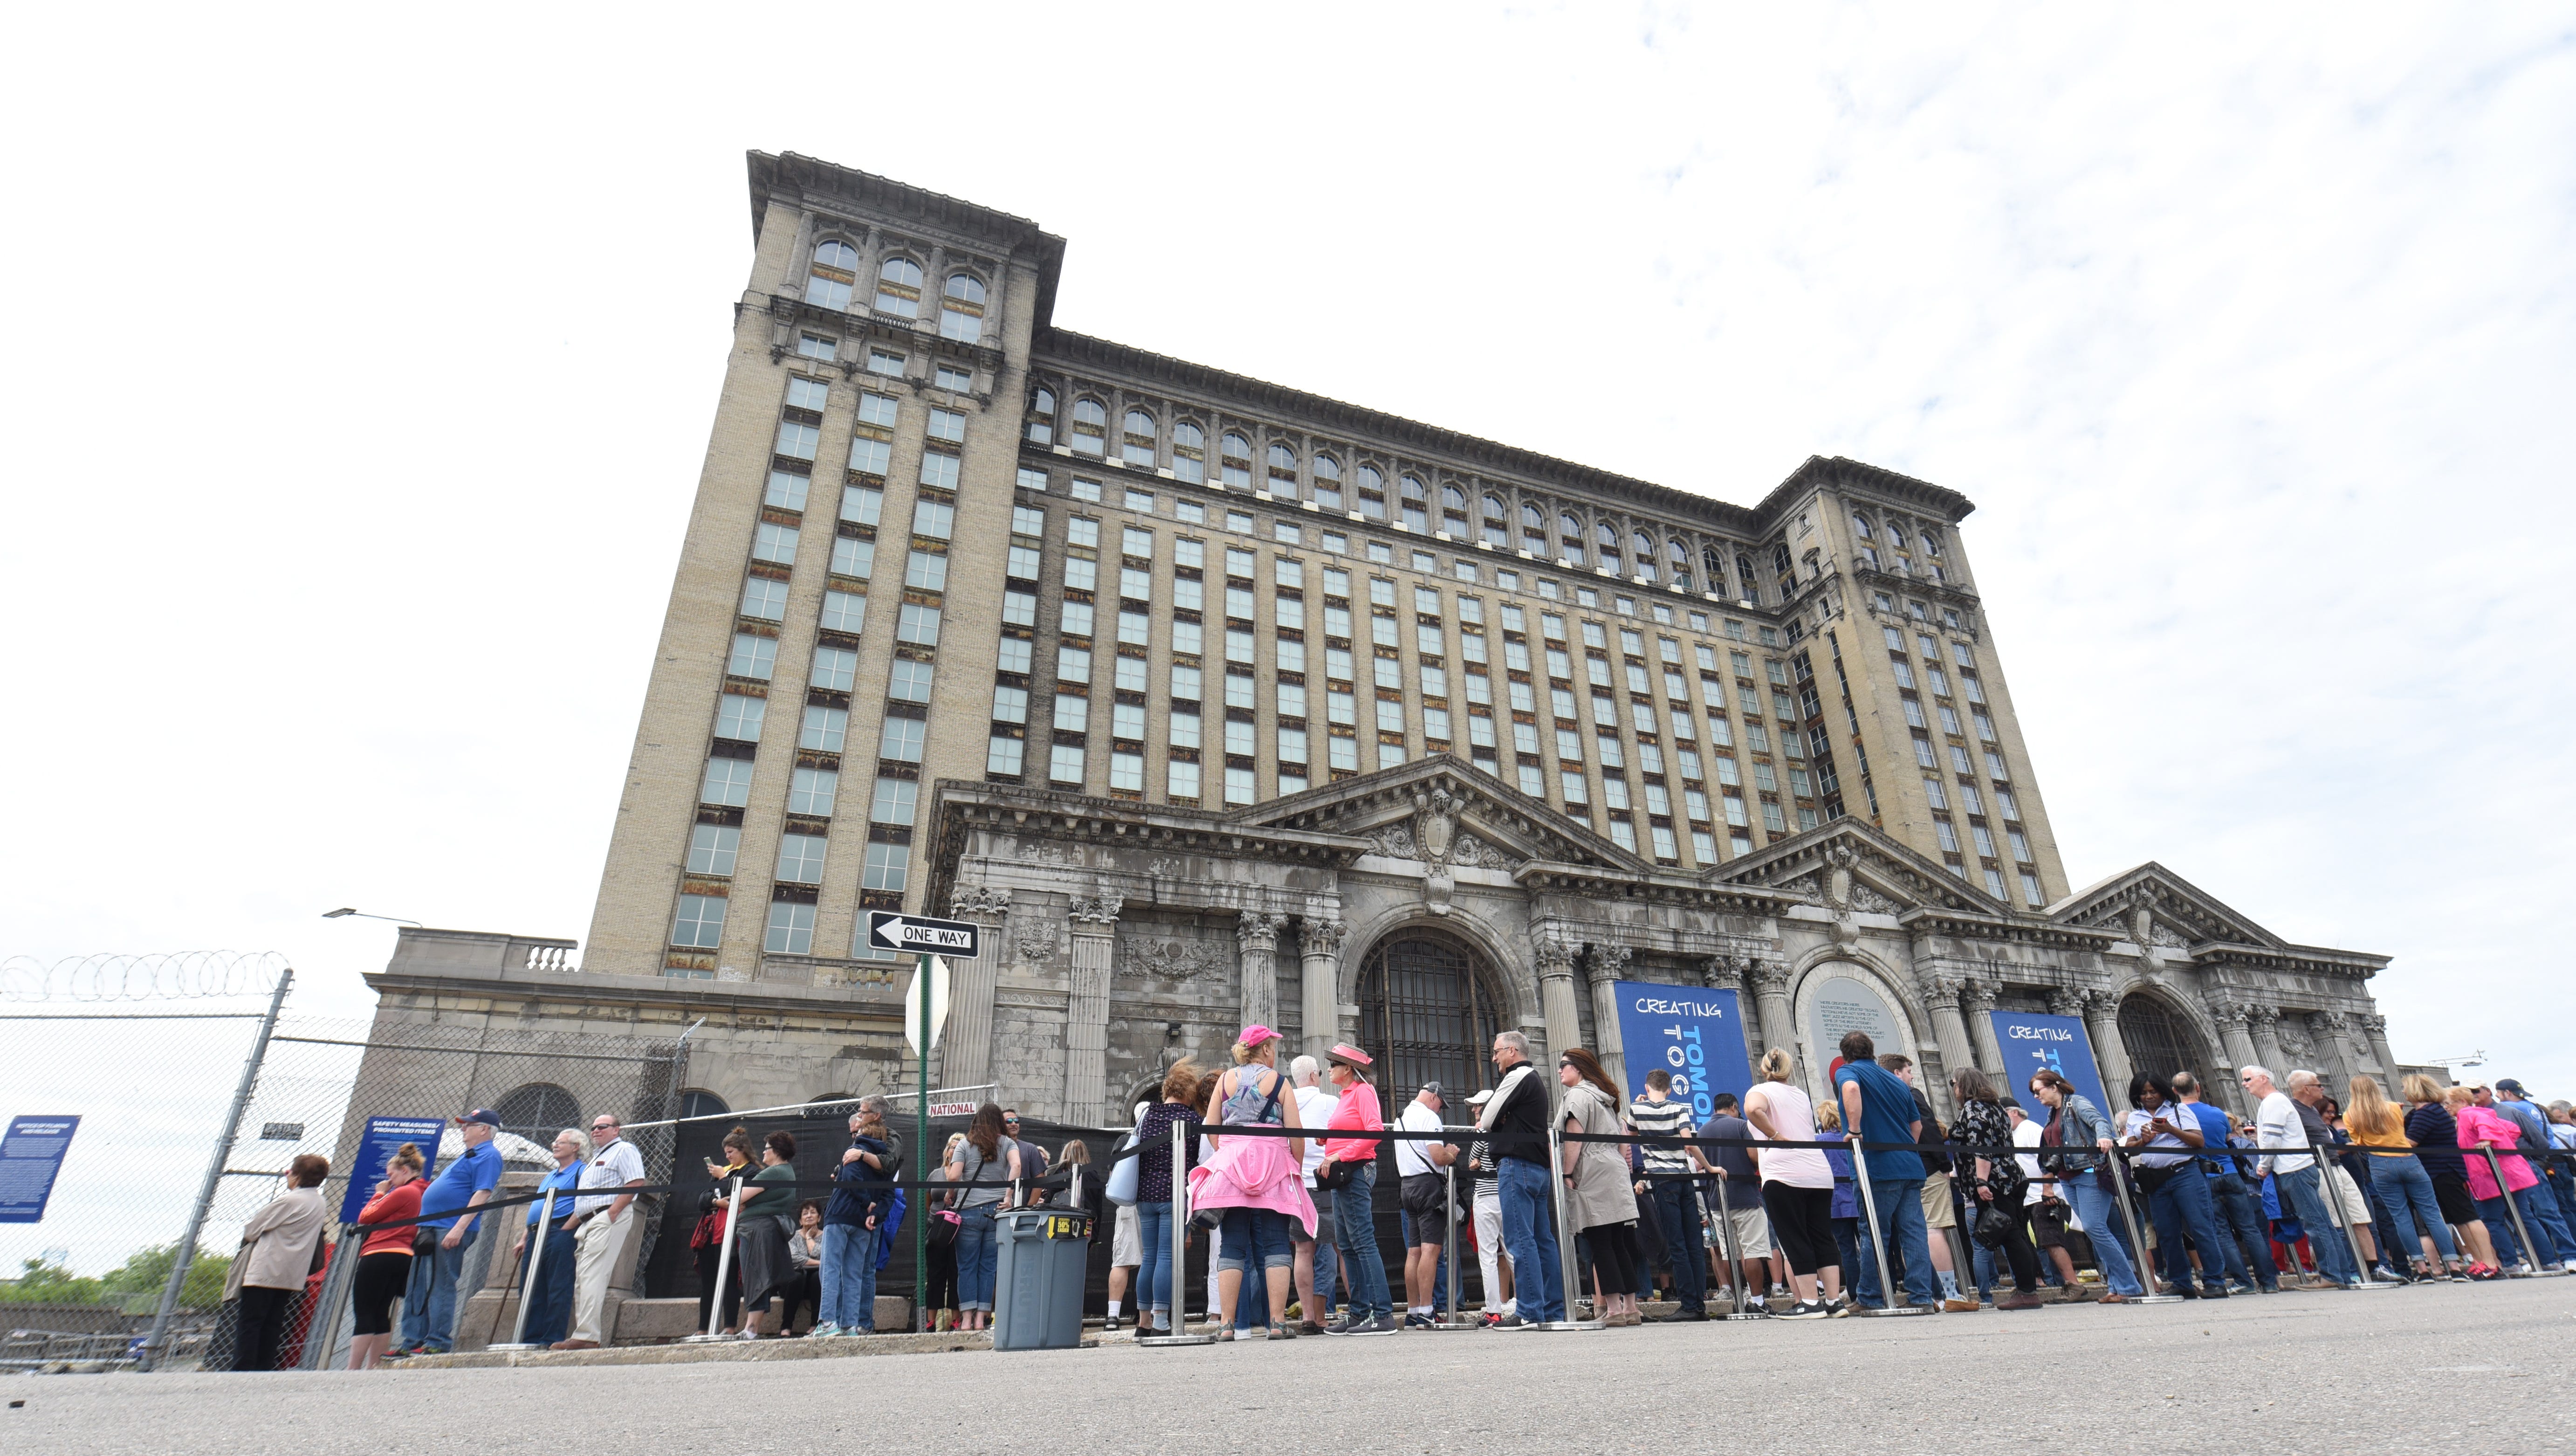 Hundreds of people wait in line outside the Michigan tours of the station during an open house on Friday, June 22, 2108 in Detroit.